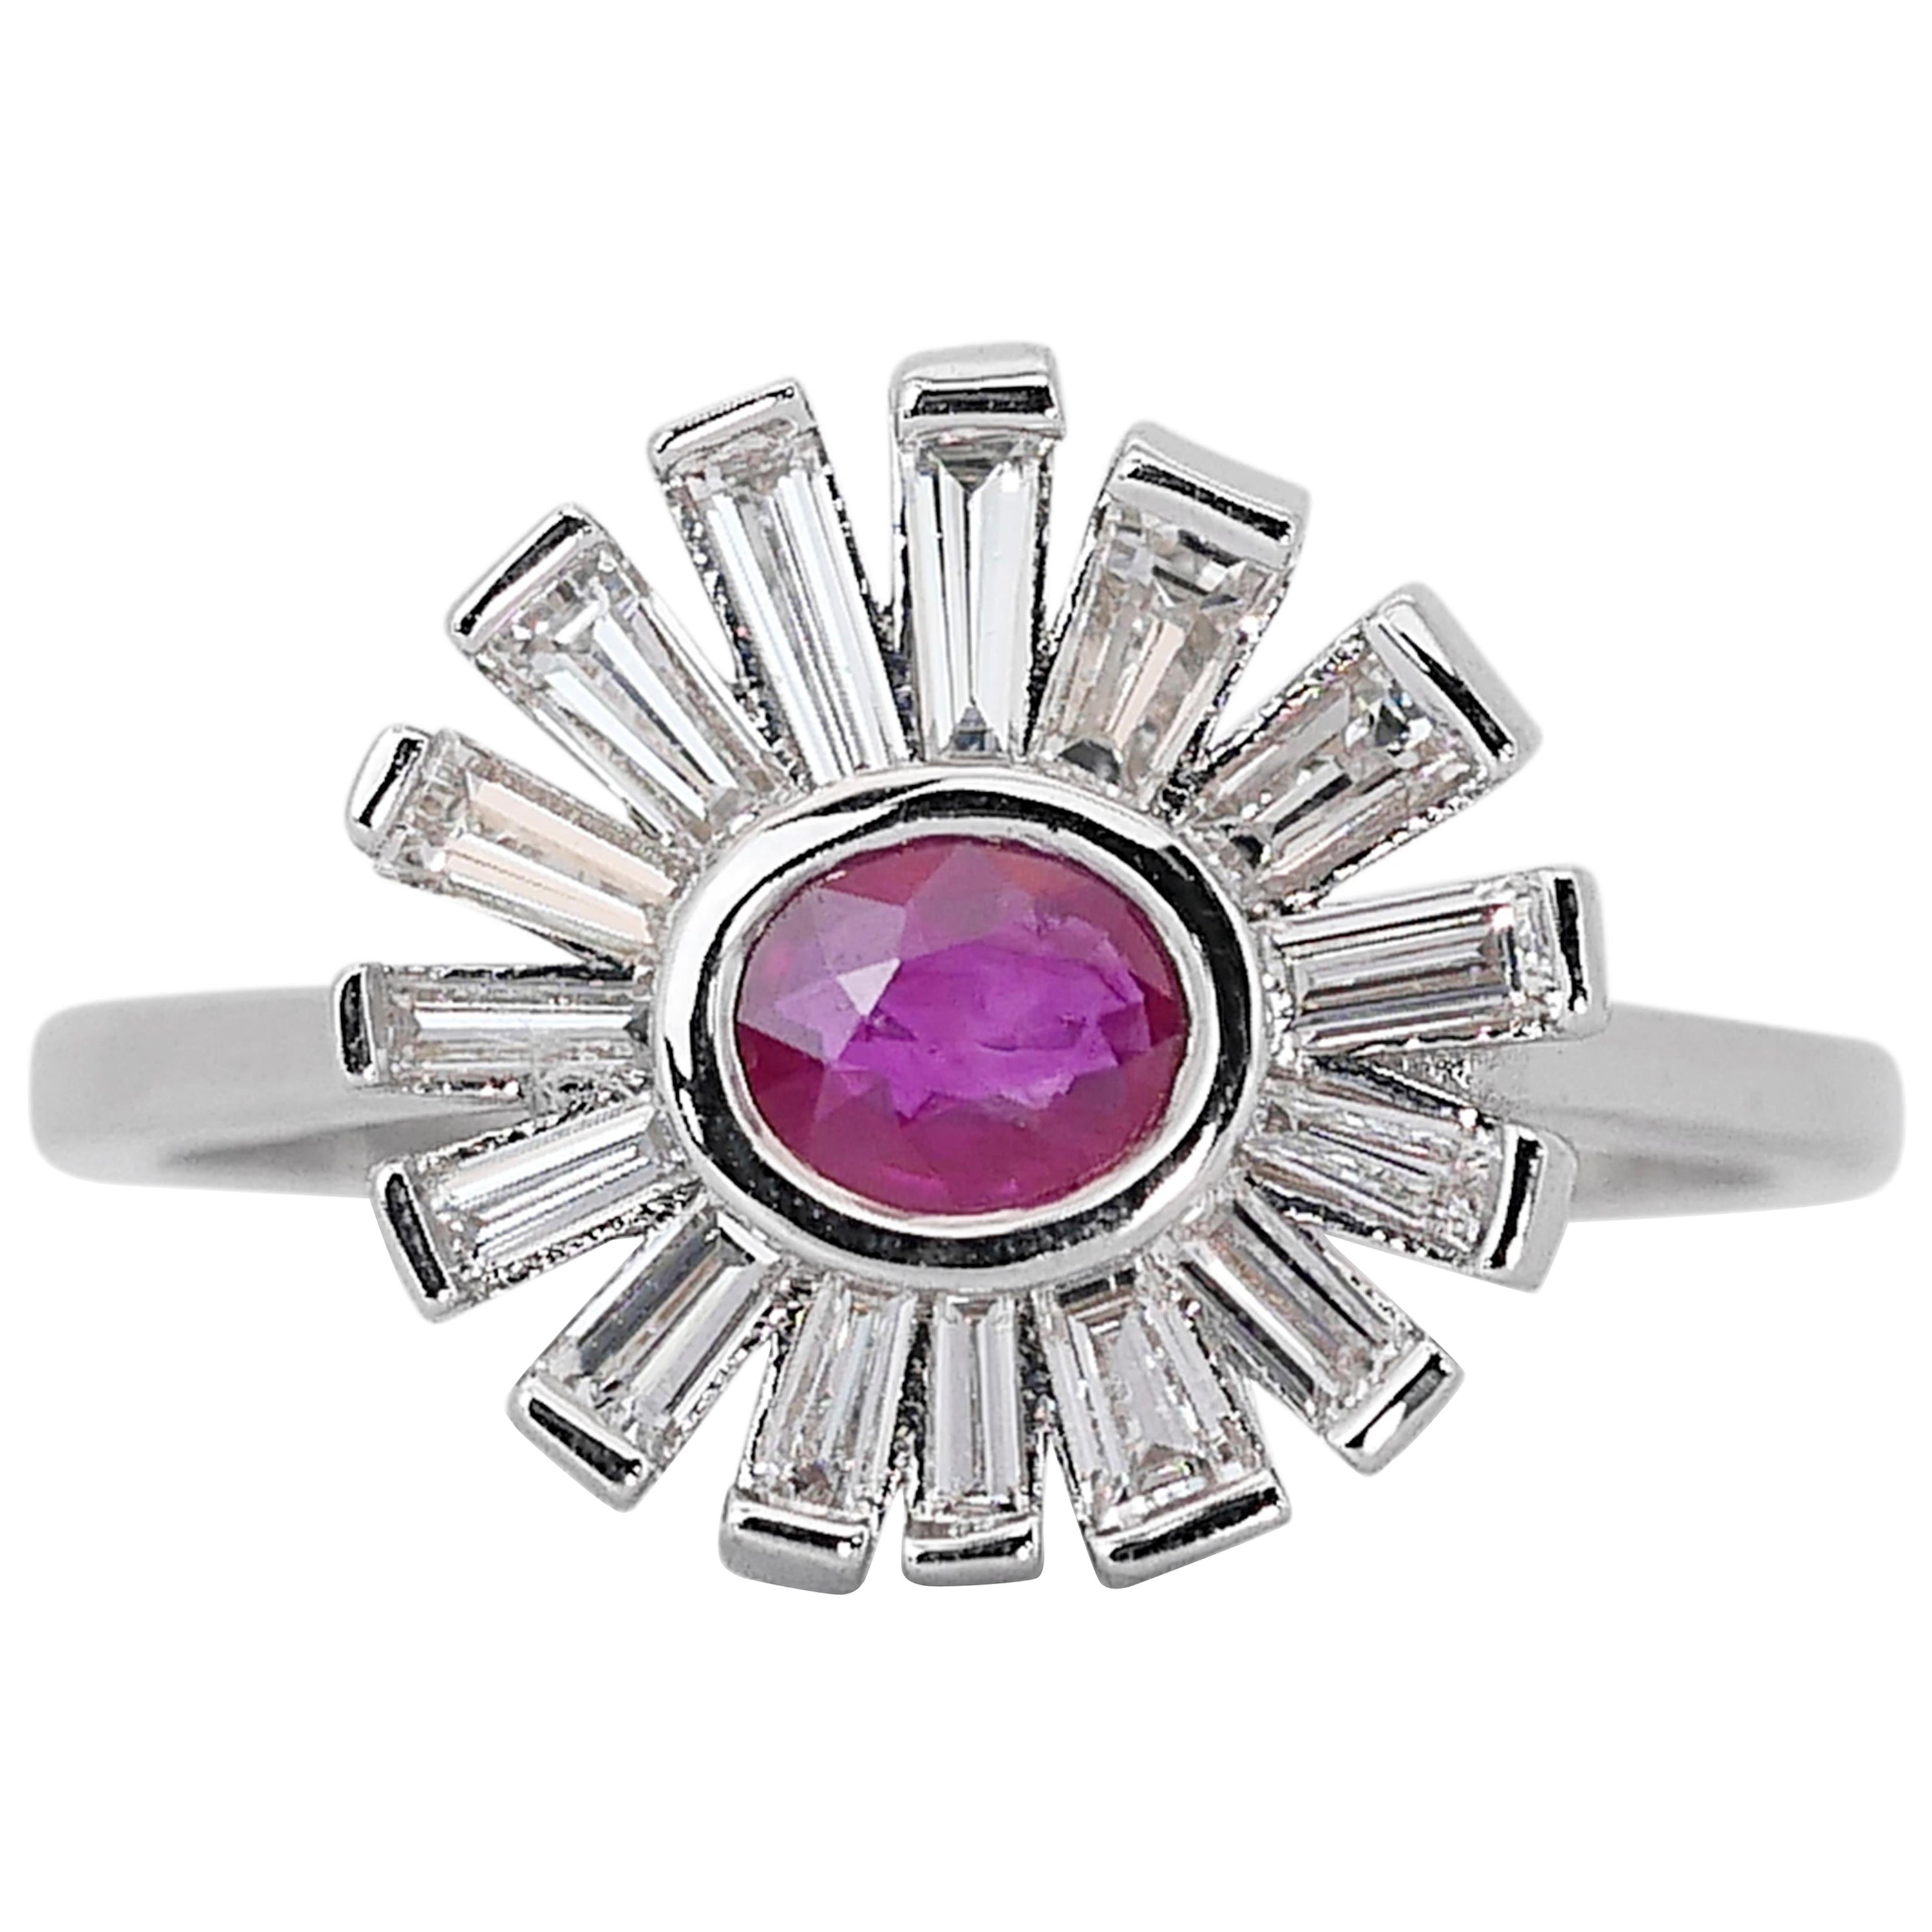 Stunning 1.20ct Ruby and Diamonds Halo Ring in 18k White Gold - IGI Certified